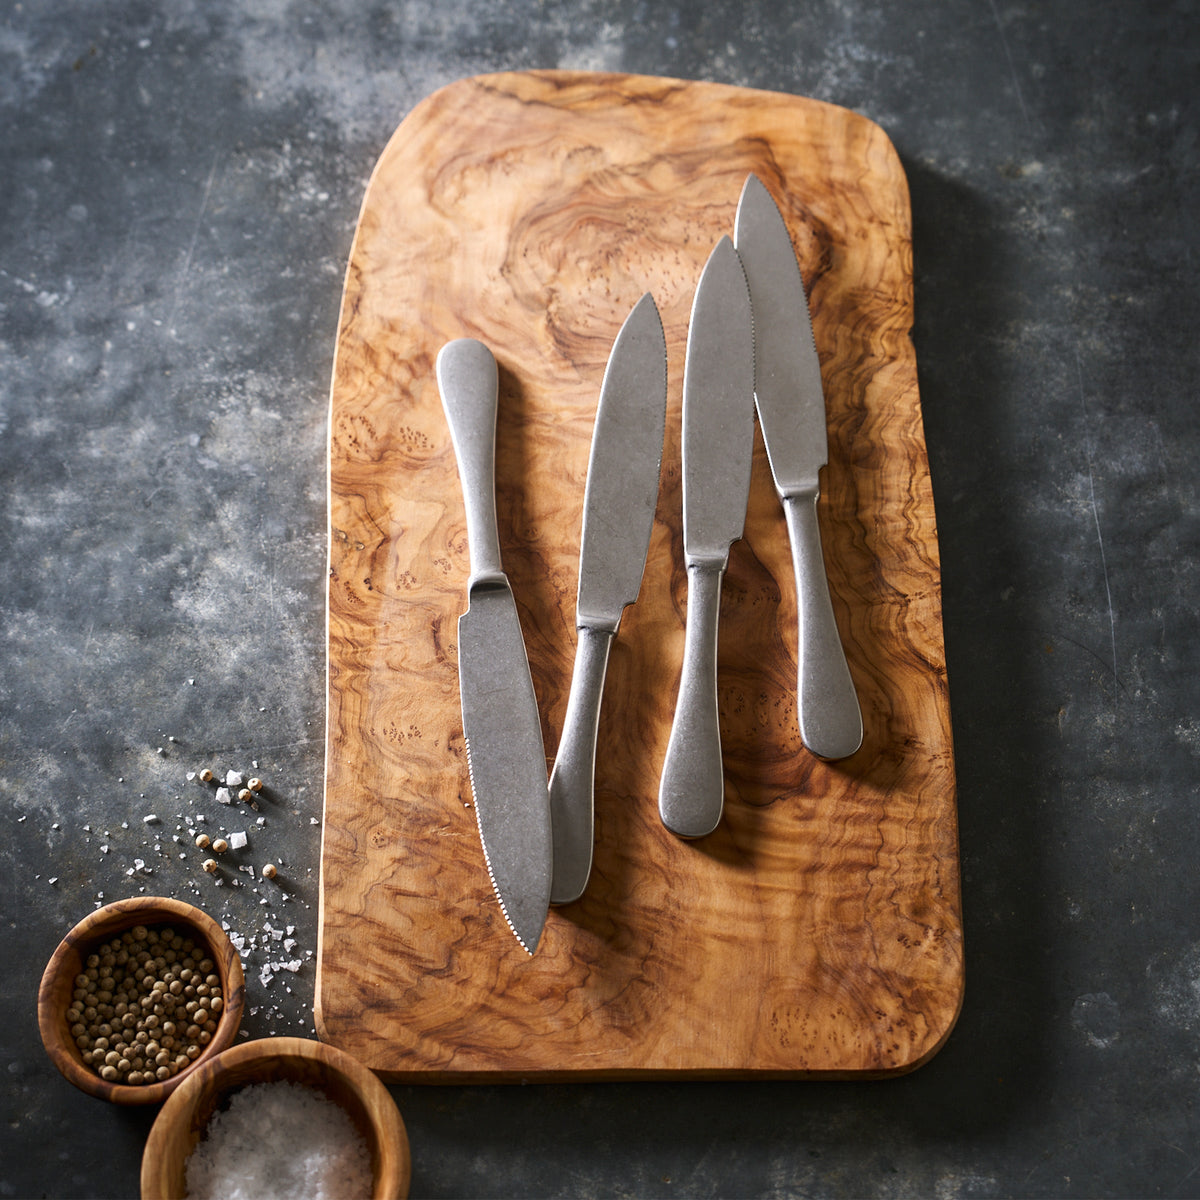 Four Mepra Pewter Set/4 Steak Knives with a stonewashed finish on a wooden cutting board.